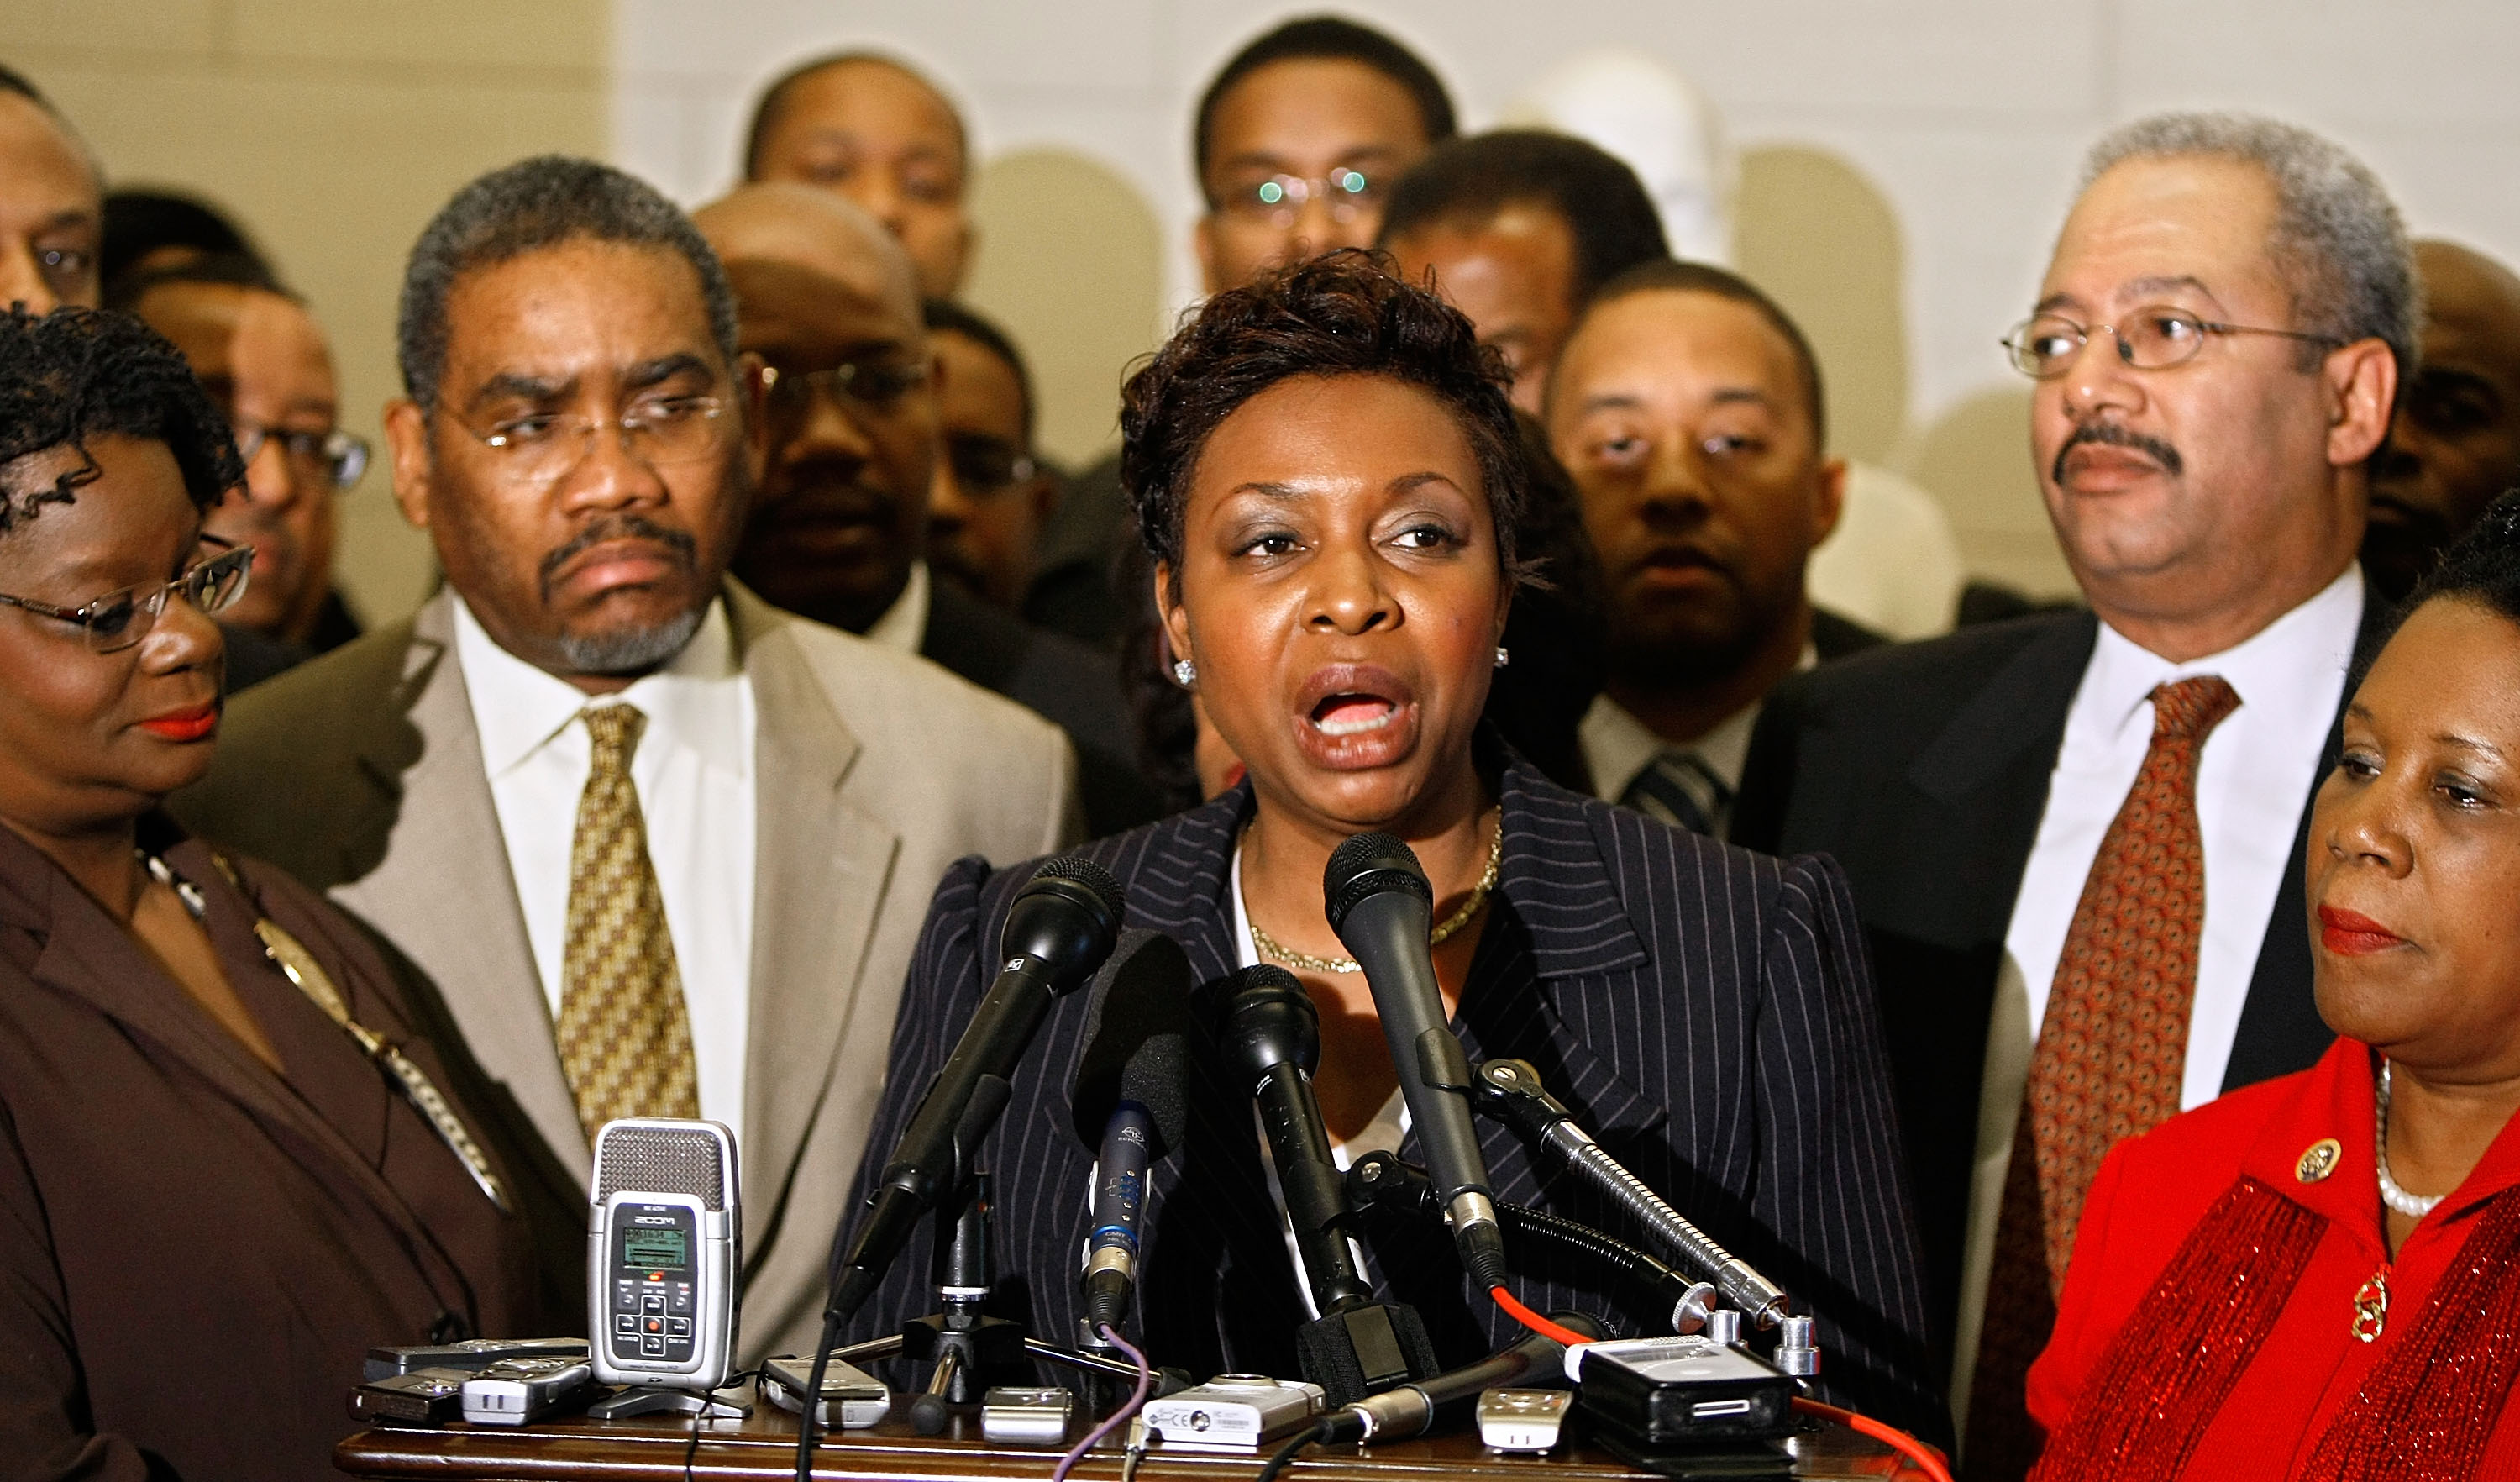 (L-R) Rep. Gwen Moore, Rep. Gregory Meeks, Rep. Yvette Clarke, Rep. Chaka Fattah and Rep. Sheila Jackson Lee conduct a news conference during the Congressional Black Caucus' Economic Security Taskforce on TARP/TALF Access Summit in the Longworth House Office Building March 30, 2009 in Washington, DC. (Photo by Chip Somodevilla/Getty Images)